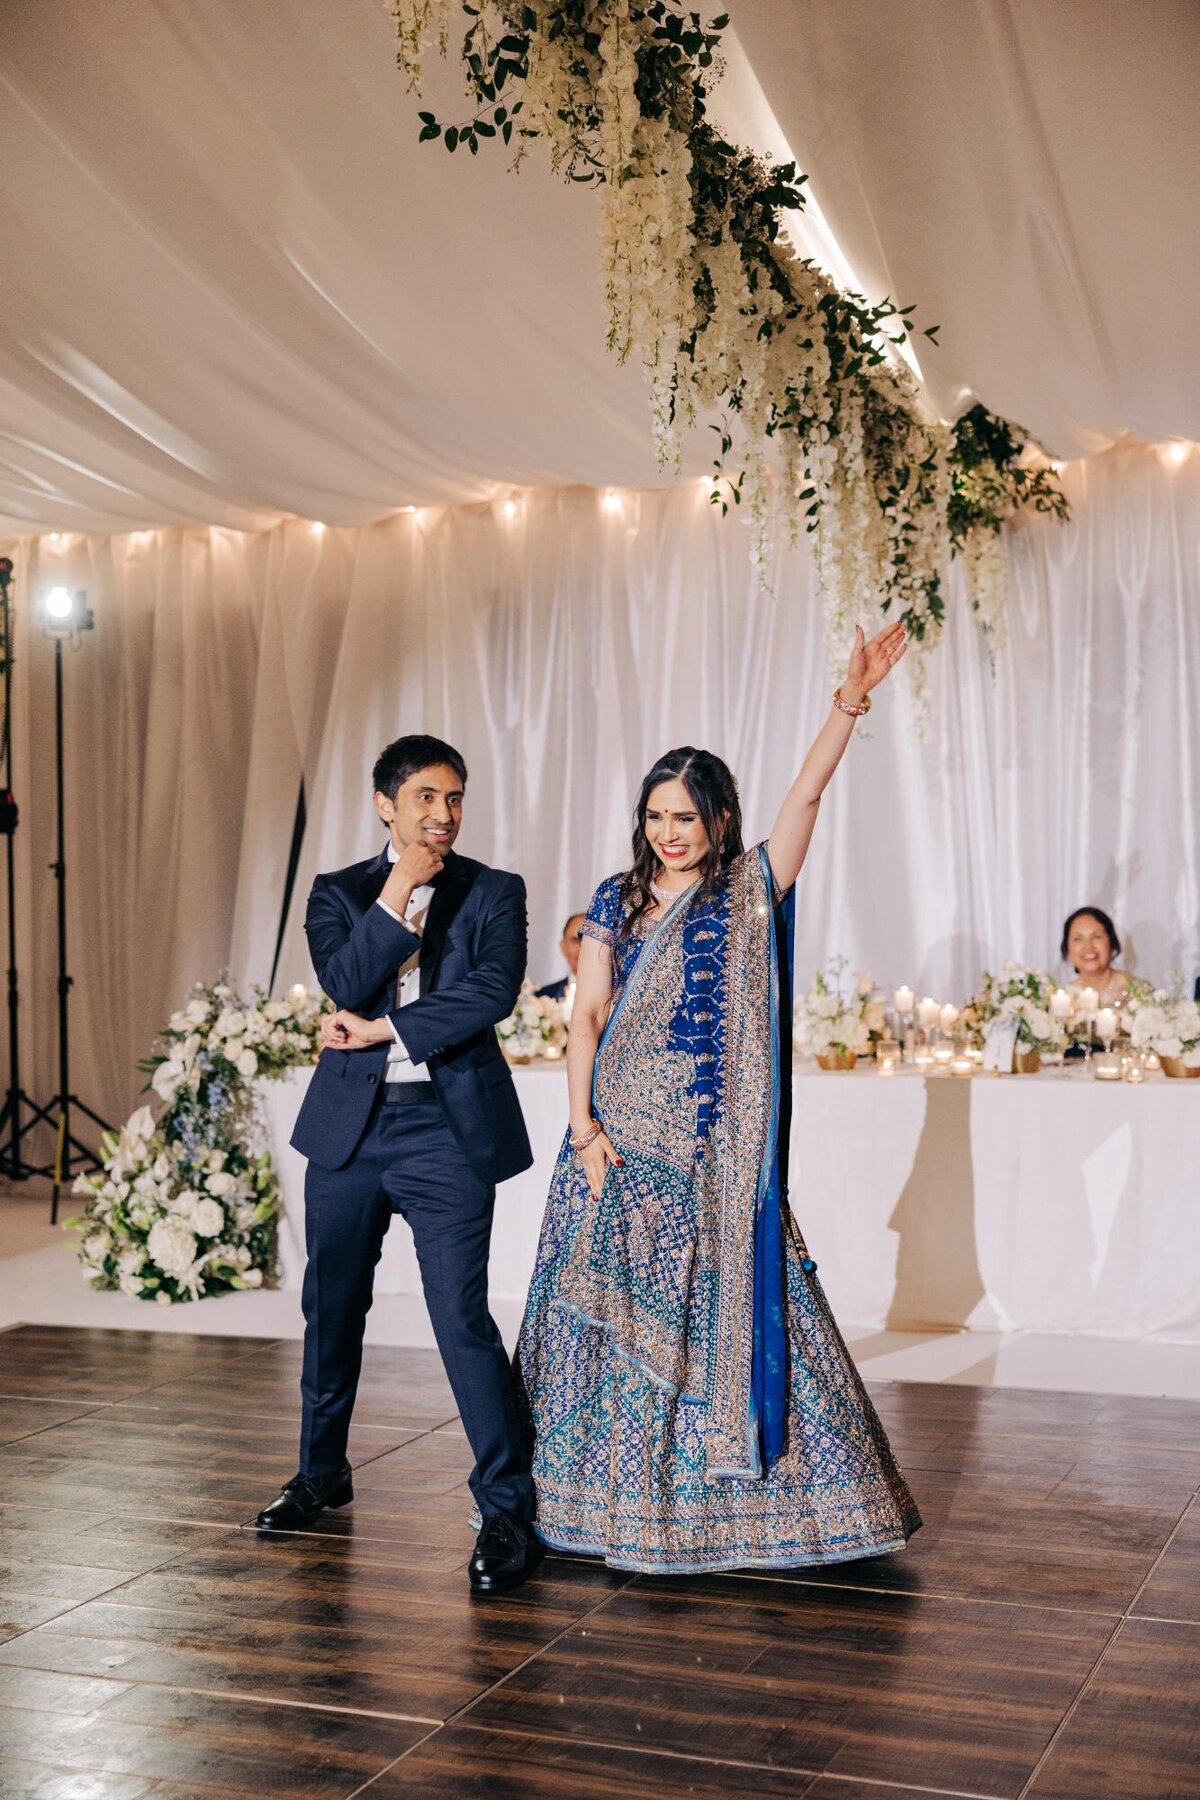 A couple dancing energetically at their wedding reception, with the bride in a decorative blue sari and the groom in a suit, under a canopy adorned with flowers.